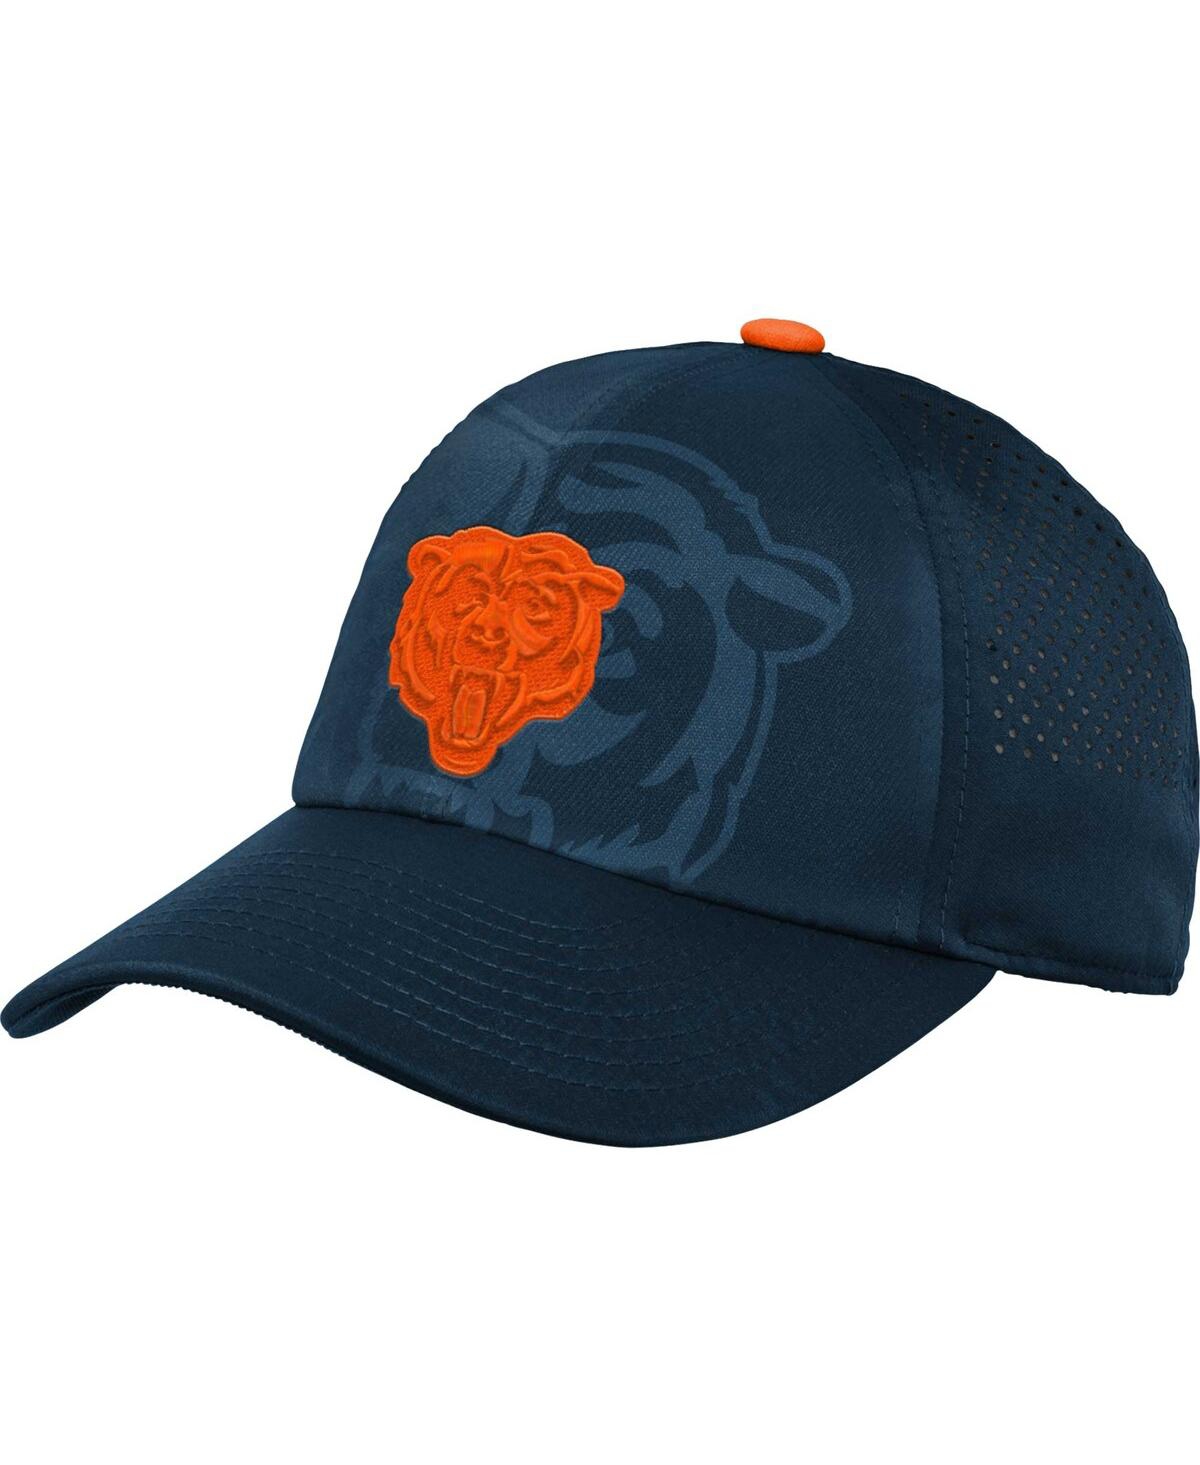 Outerstuff Kids' Youth Boys And Girls Navy Chicago Bears Tailgate Adjustable Hat